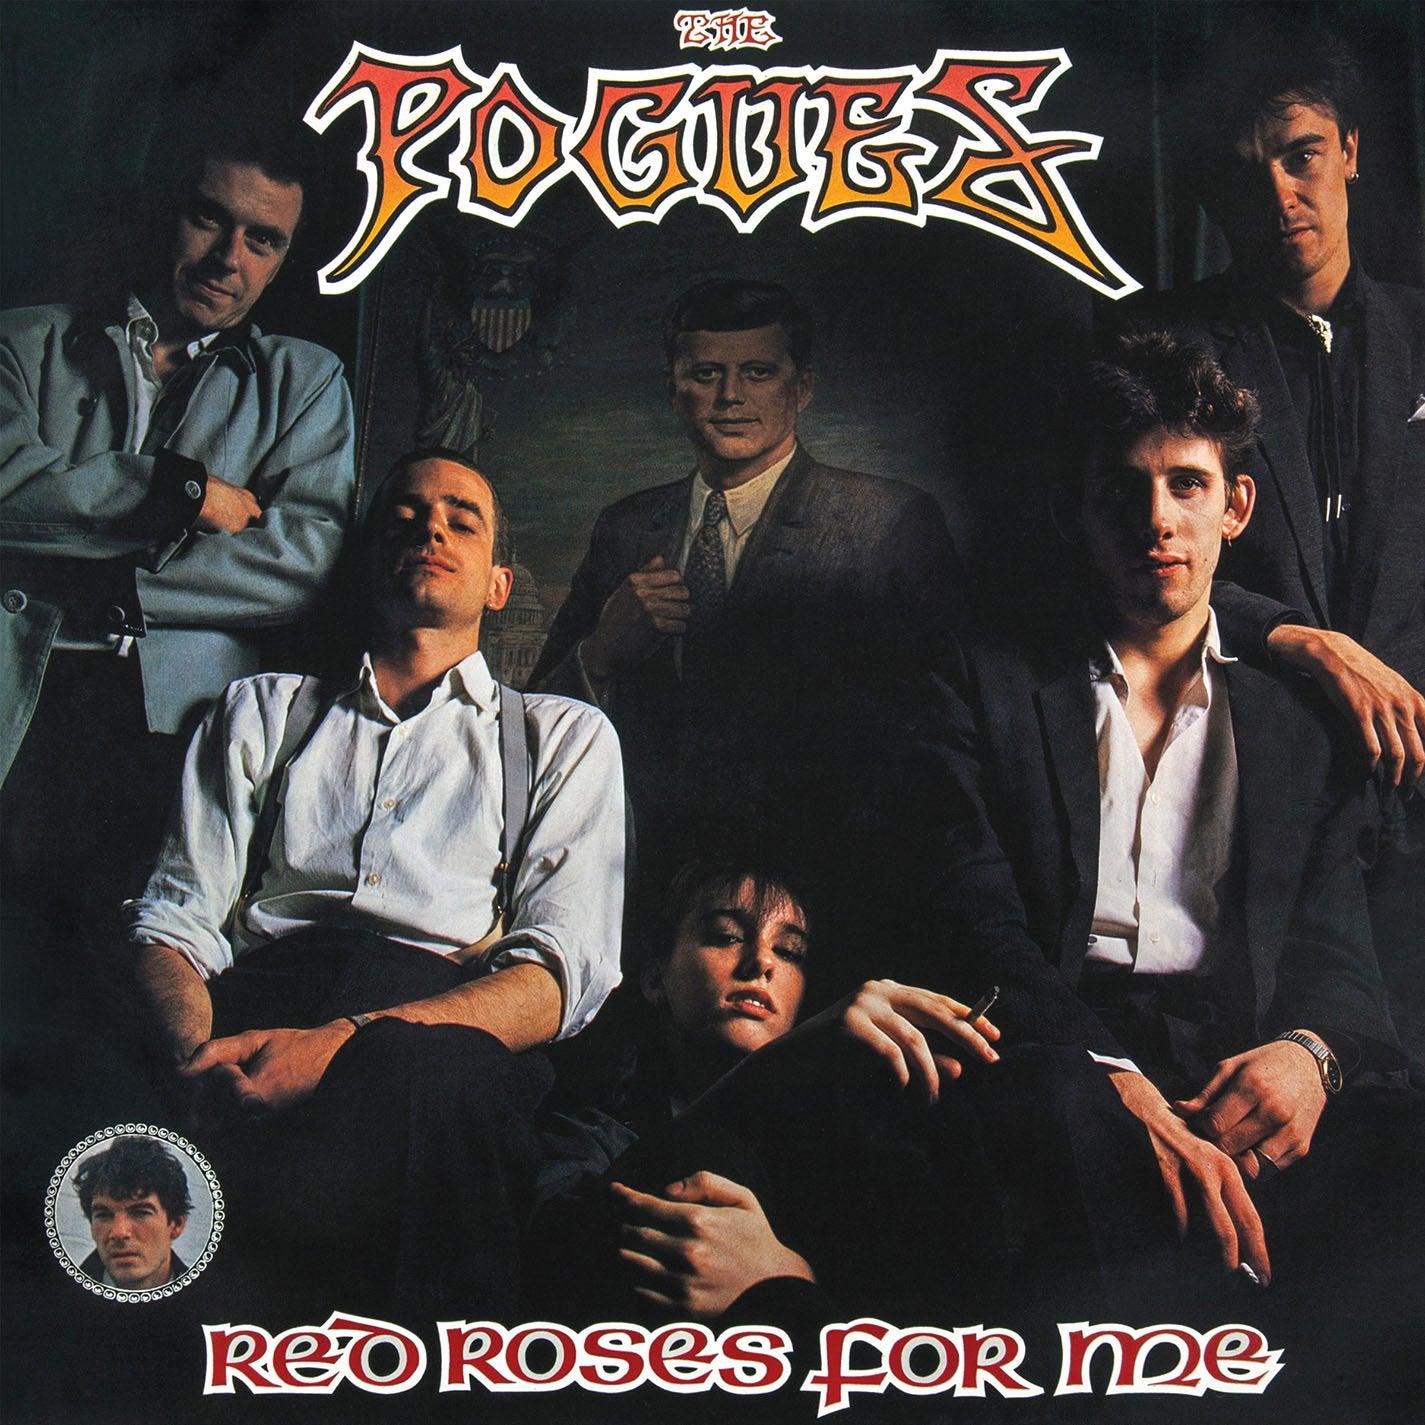 THE POGUES - RED ROSES FOR ME - VINYL LP - Wah Wah Records